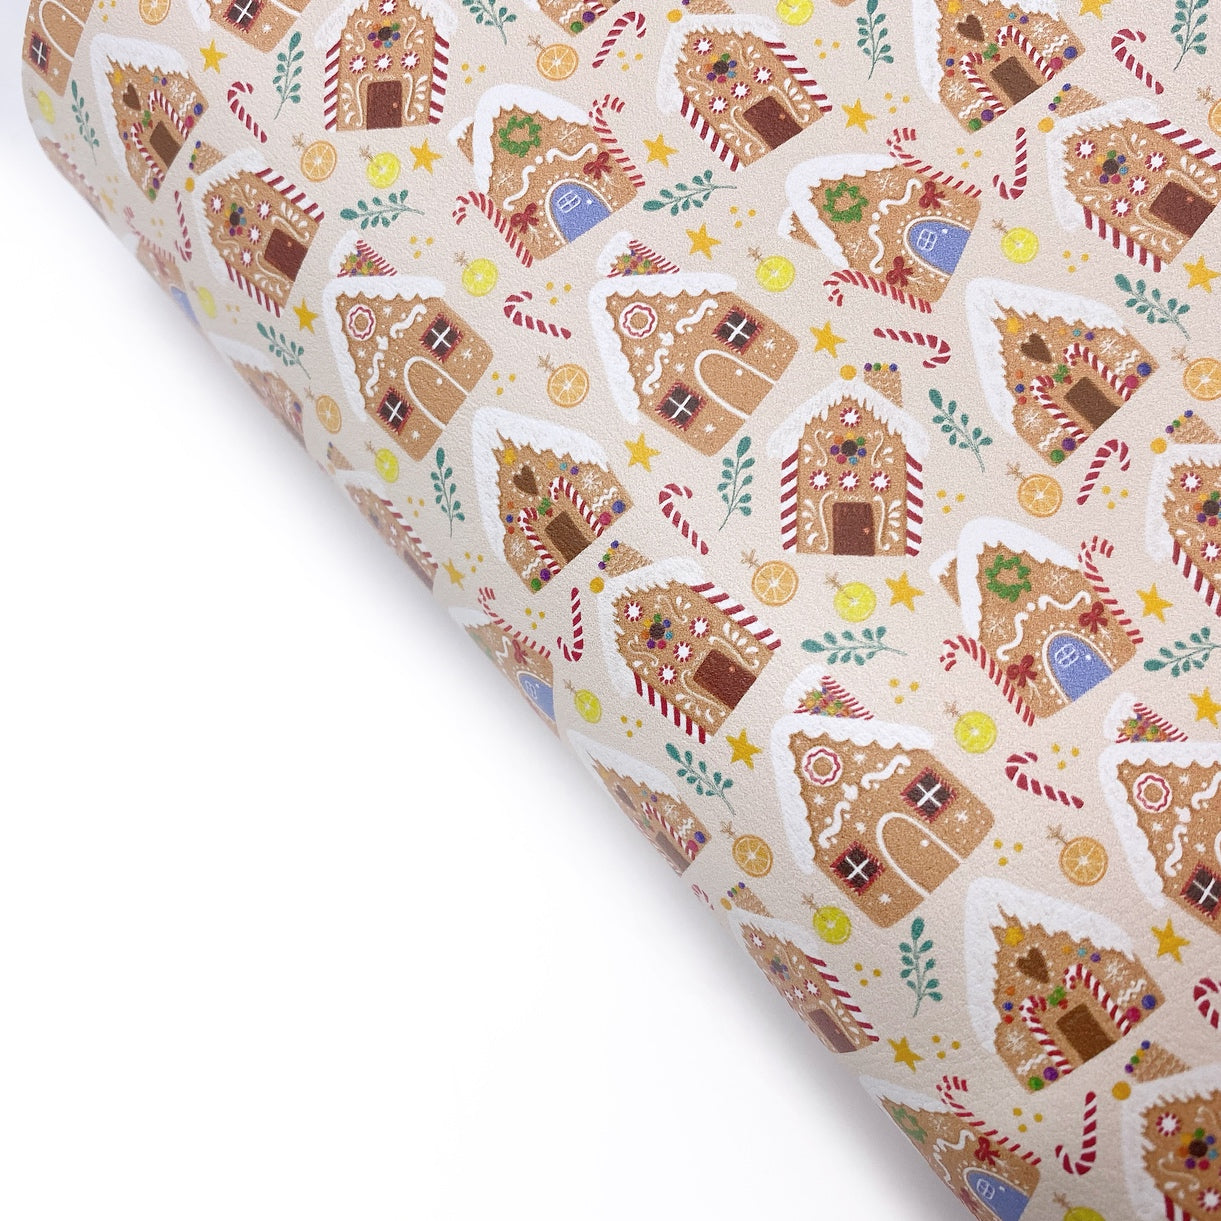 Gingerbread House Premium Faux Leather Fabric Sheets